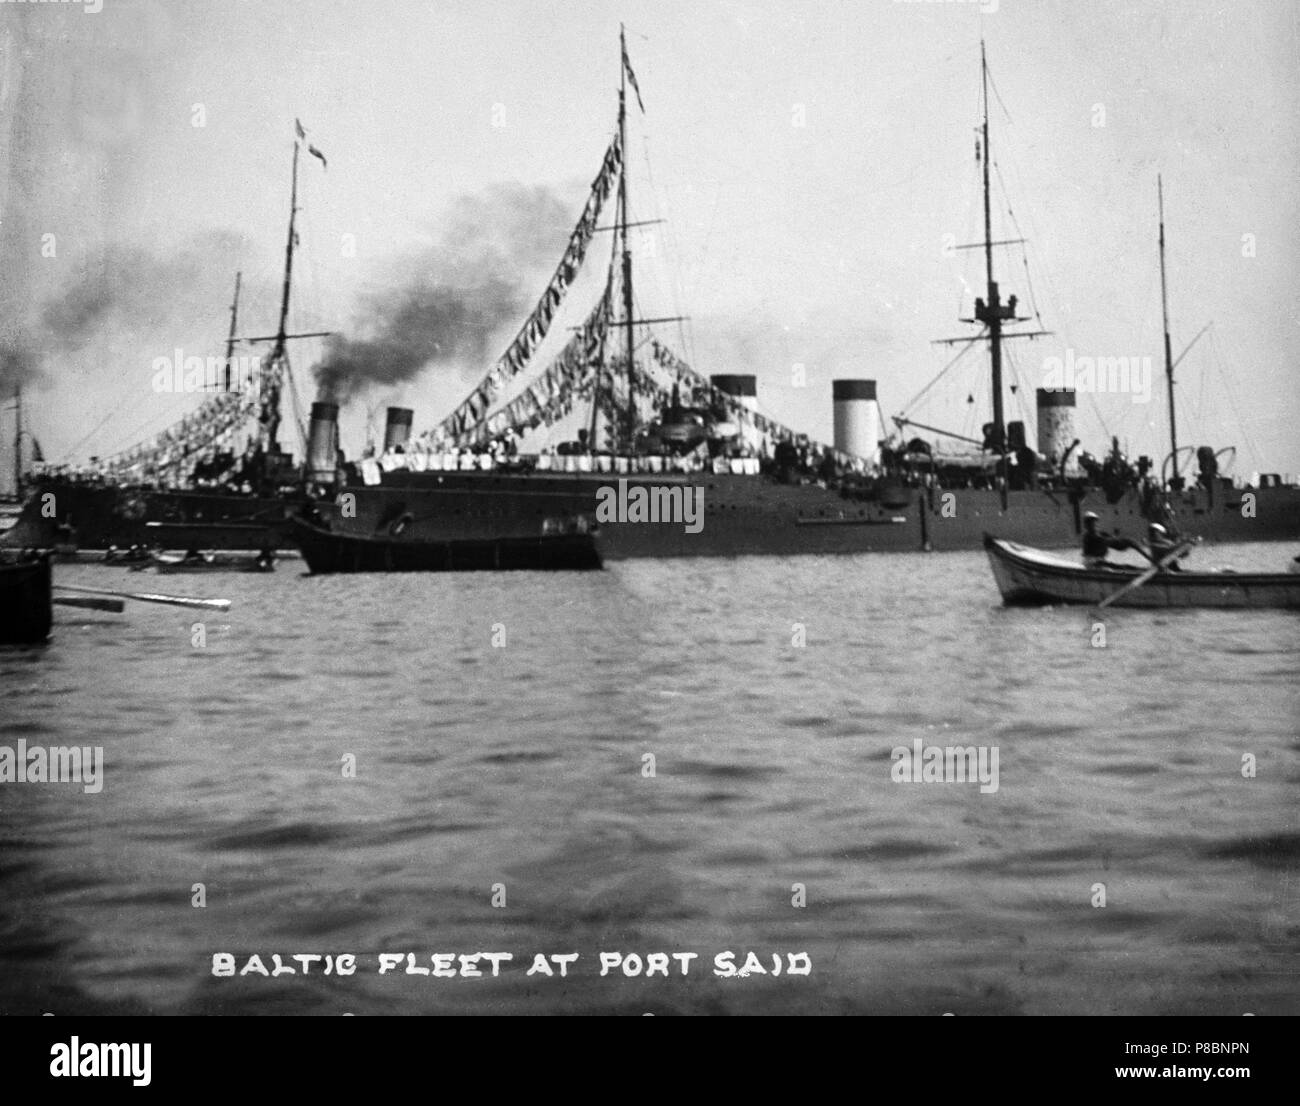 The Russian Navy Baltic fleet at Port Said in Egypt, around 1904. Stock Photo